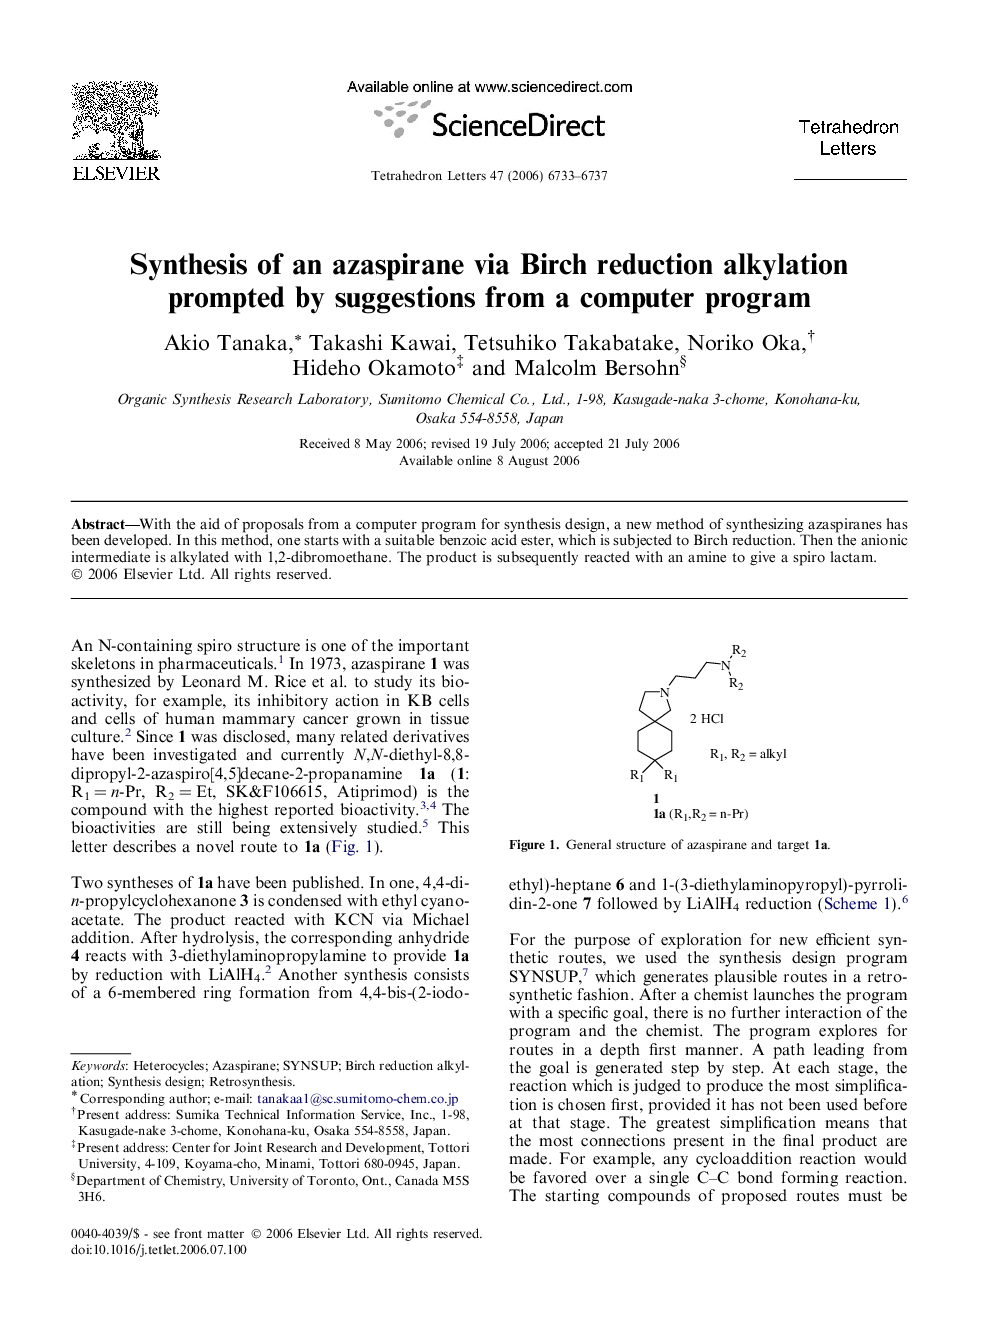 Synthesis of an azaspirane via Birch reduction alkylation prompted by suggestions from a computer program